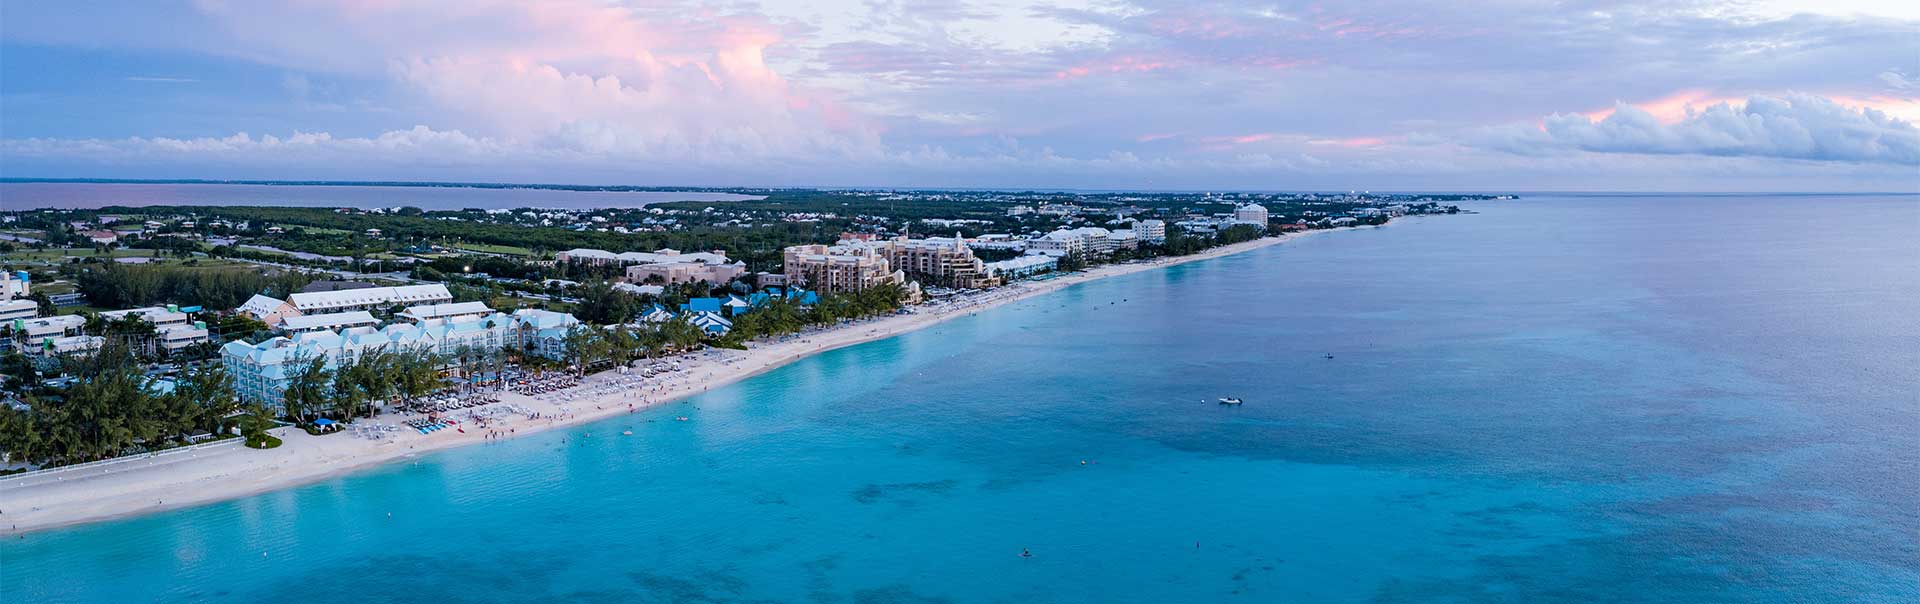 Grand Cayman aerial view of real estate